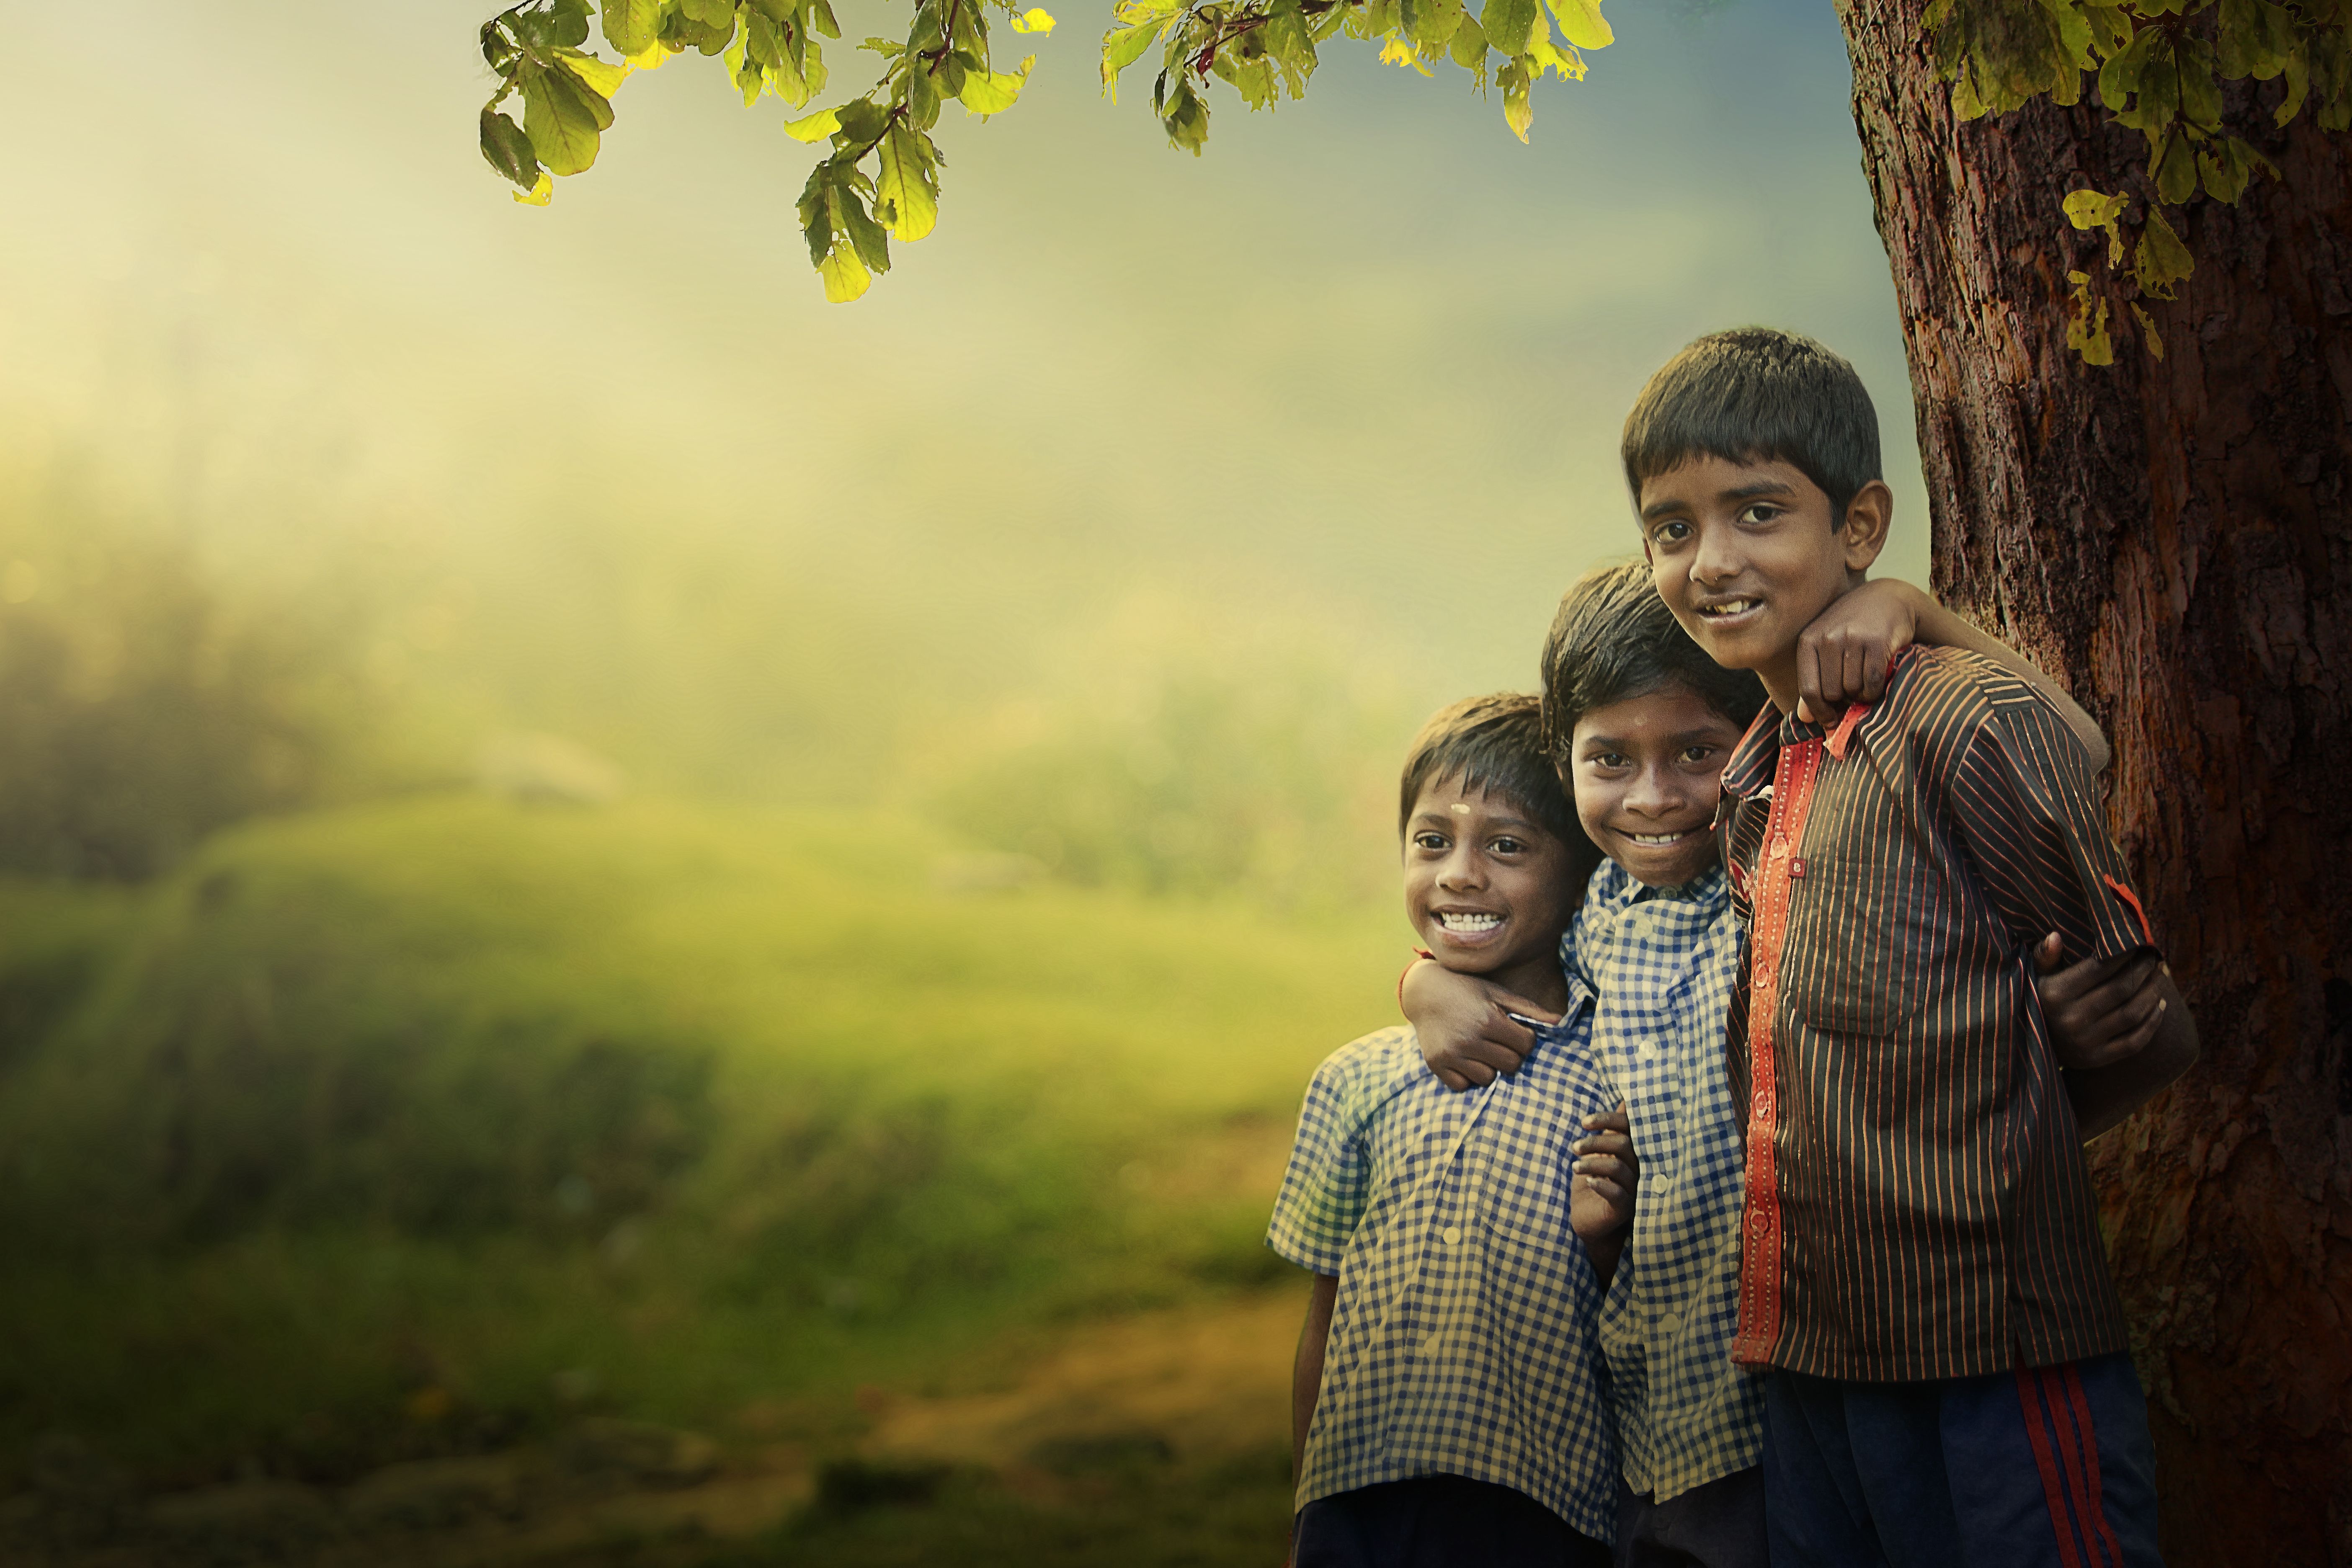 Wallpaper, sunlight, landscape, leaves, people, children, nature, love, grass, sky, India, village, morning, friendship, emotion, happiness, spring, family, vacation, rural, country, tree, autumn, child, plant, girl, smile, leisure, fun, human